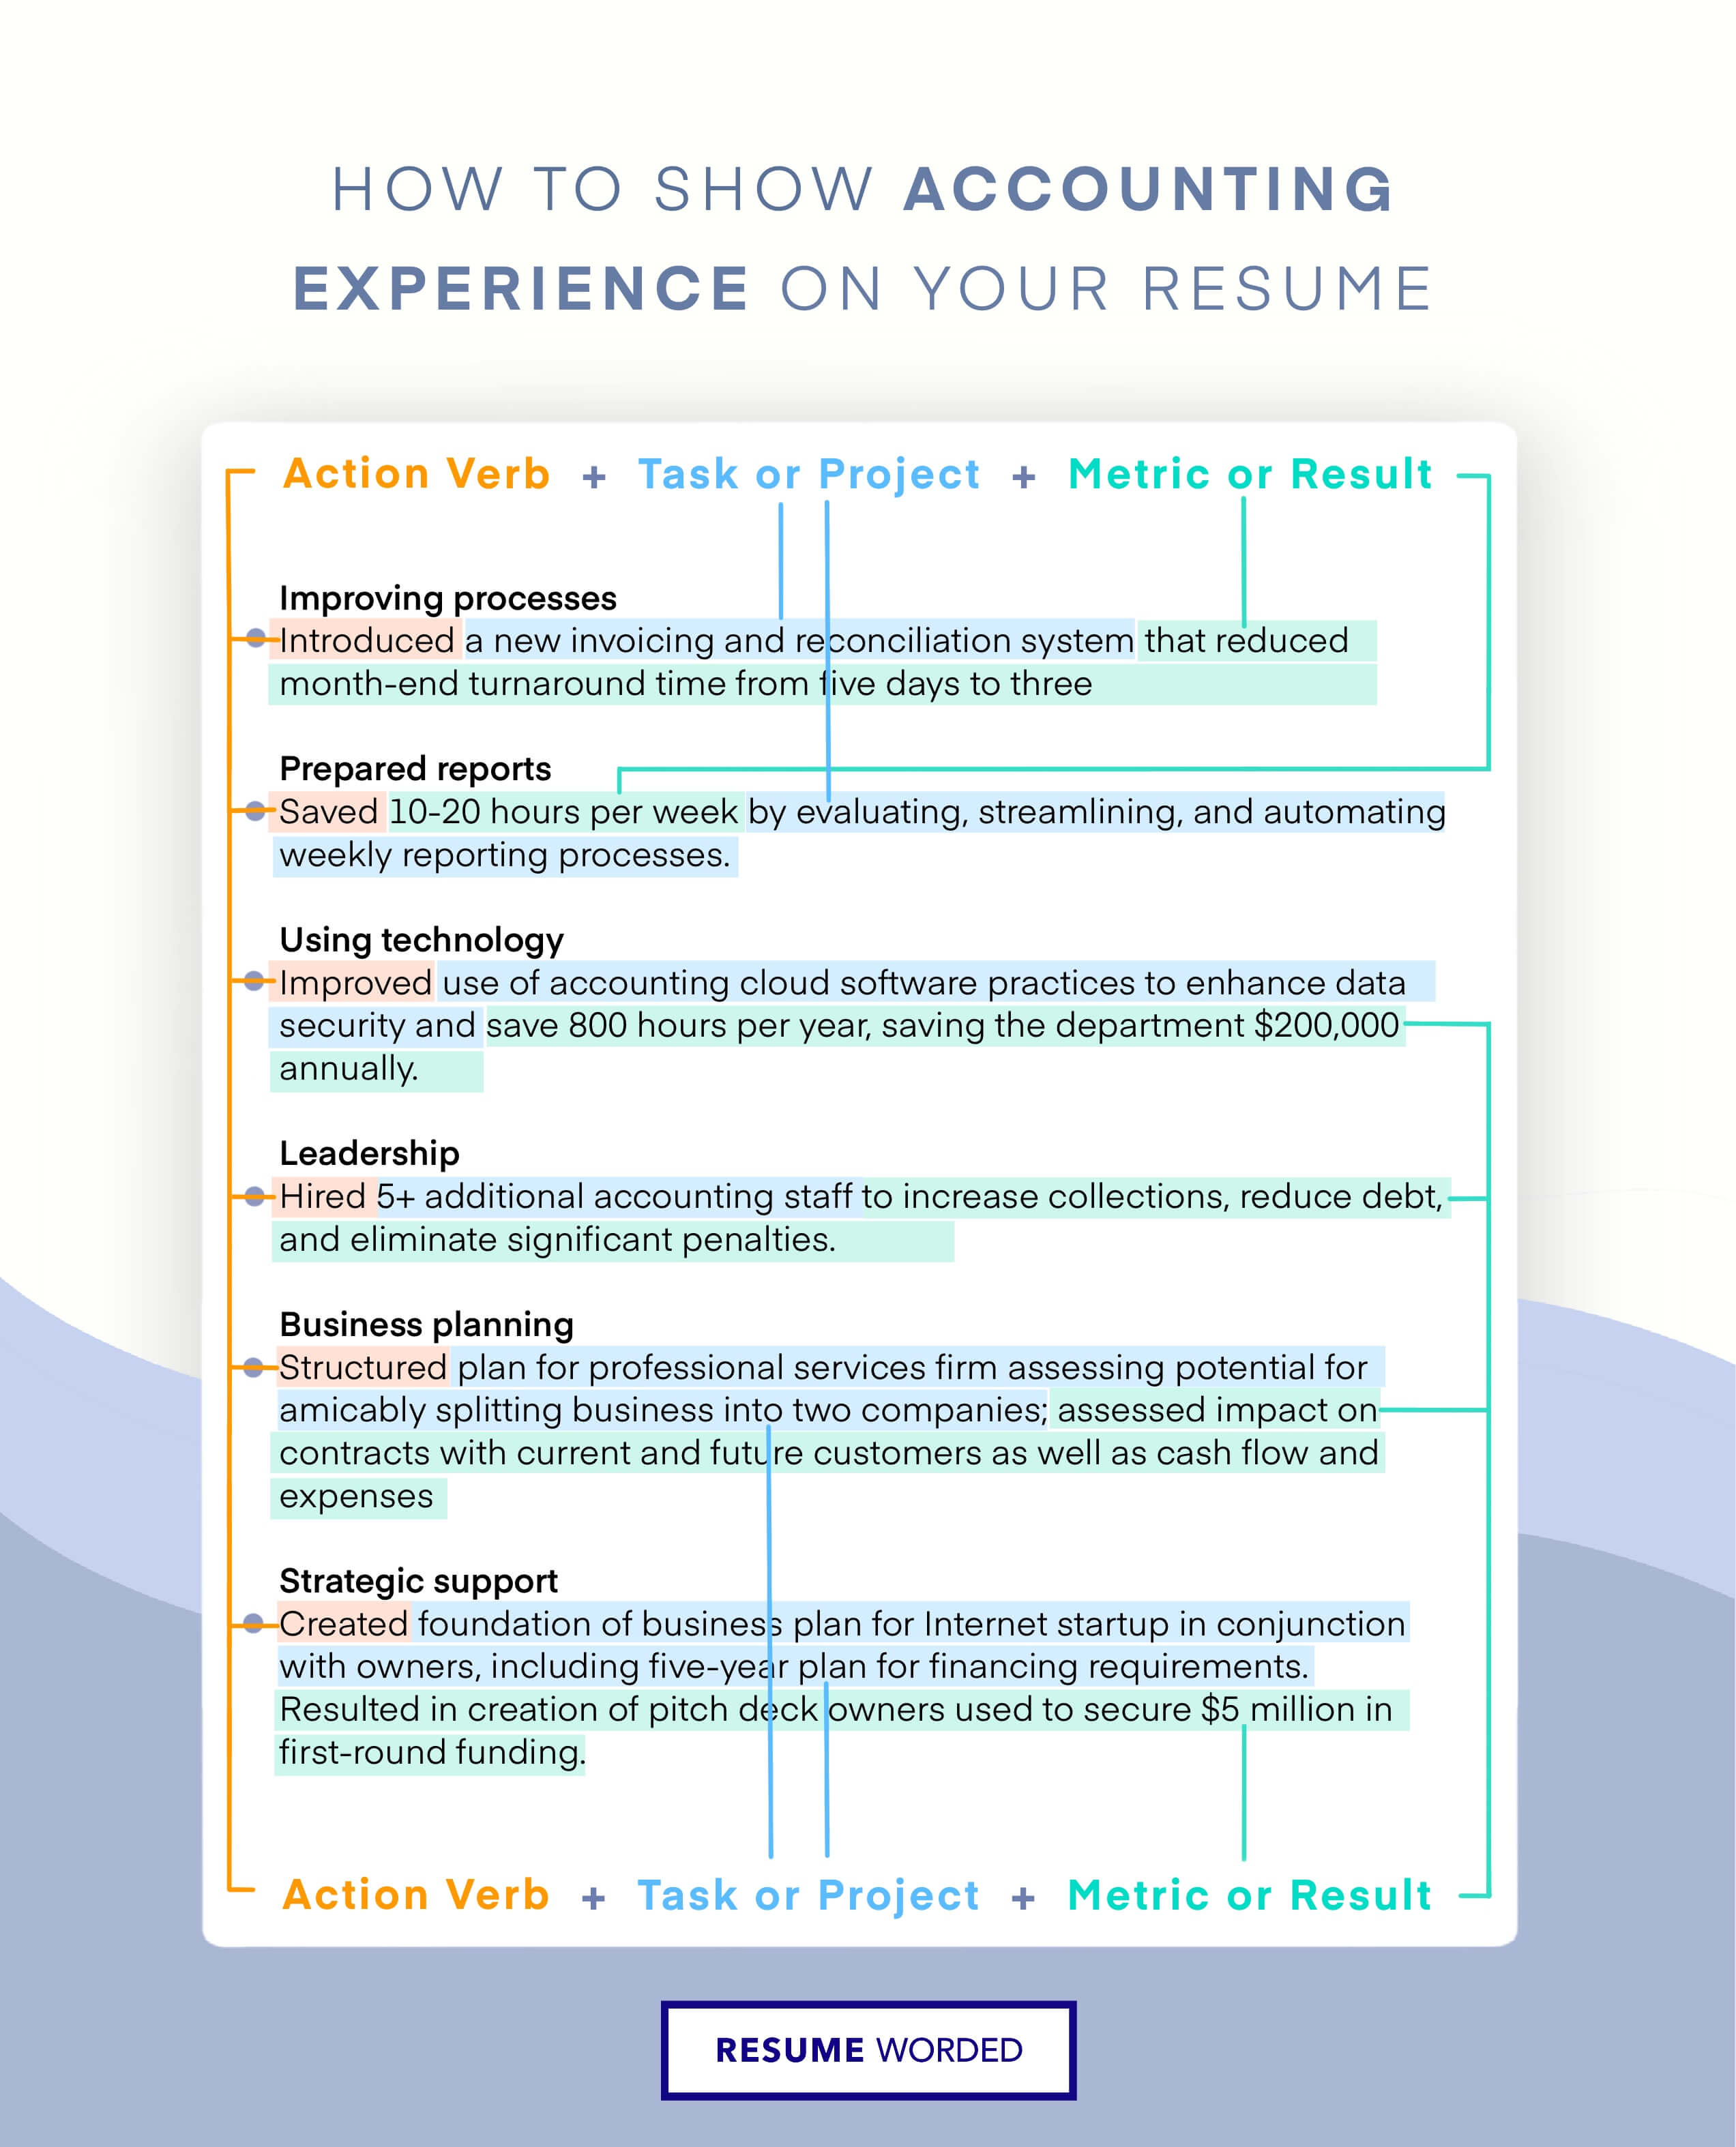 Tailor your resume to the specific Accounting job posting.